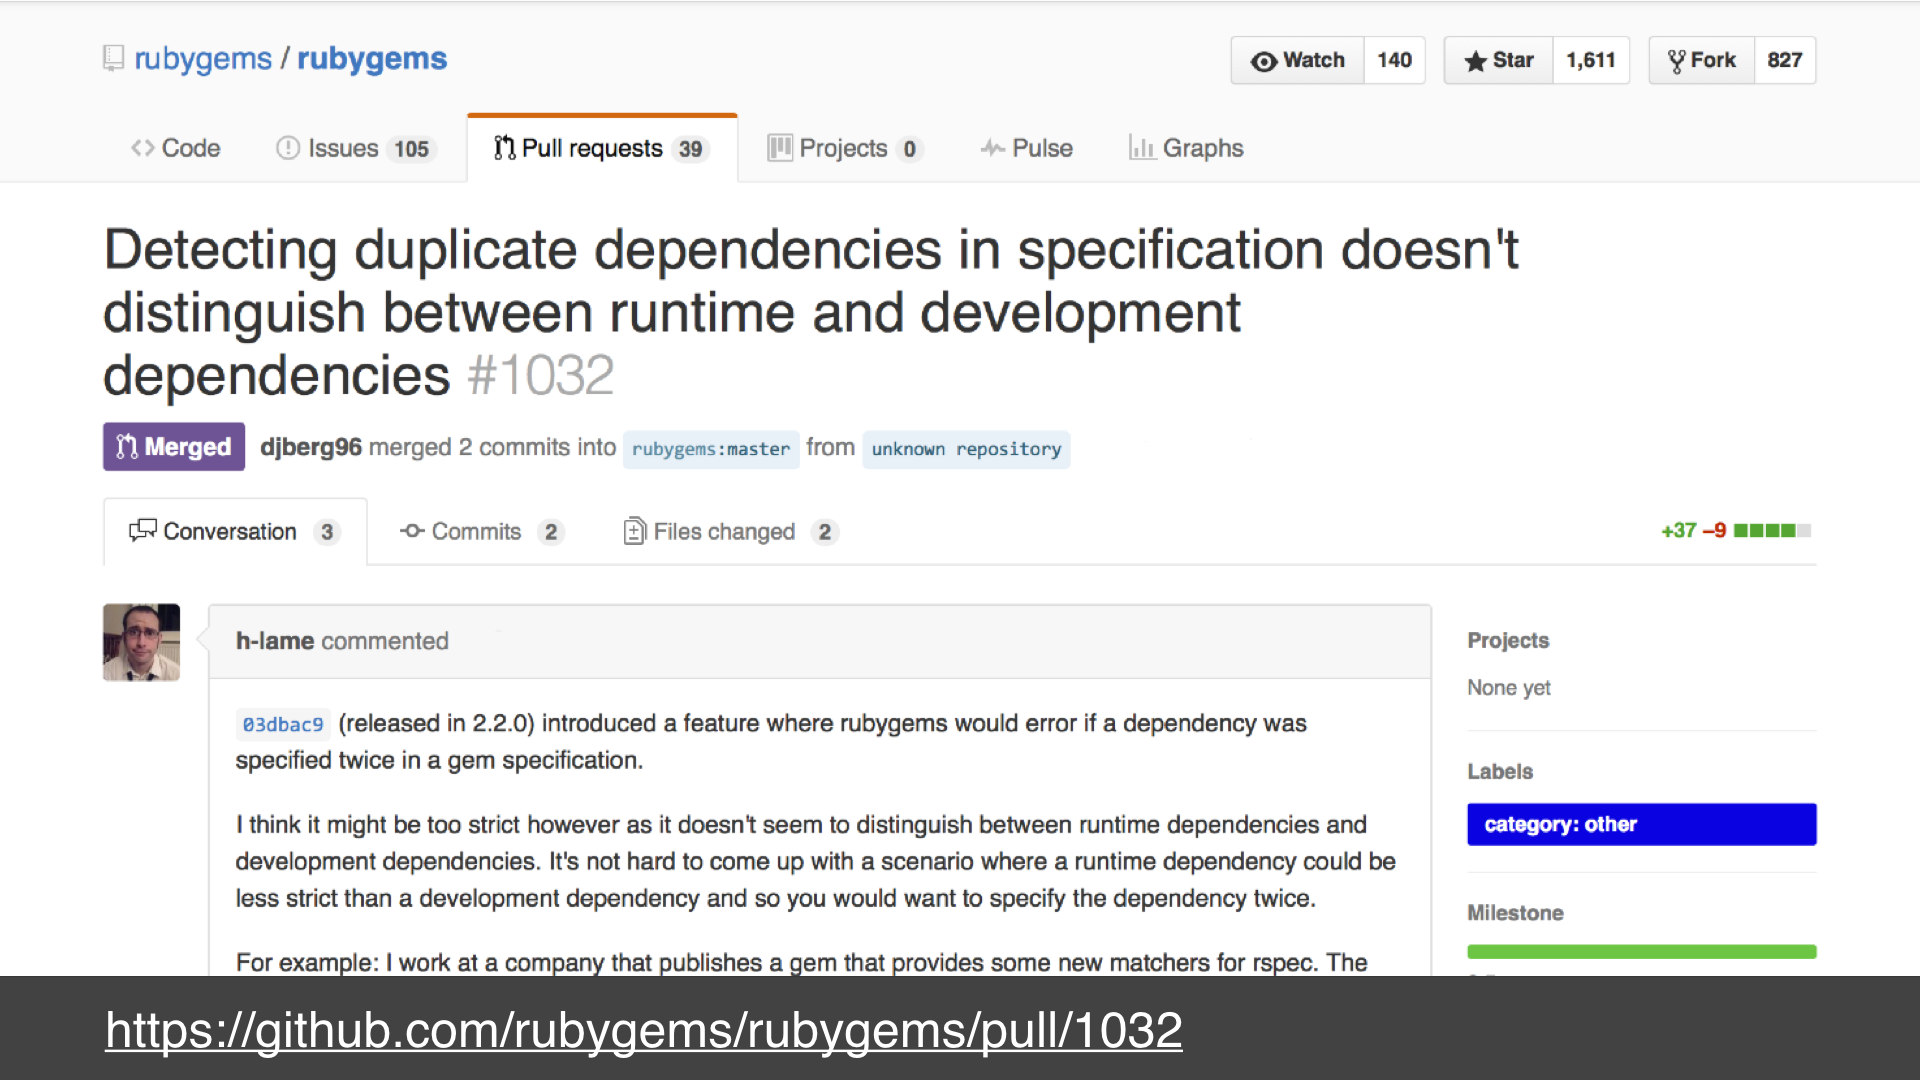 A screenshot of the issue I raised on github to describe what I found titled: 'Detecting duplicate dependencies in specification doesnʼt distinguish between runtime and development dependencies' - text: https://github.com/rubygems/rubygems/pull/1032